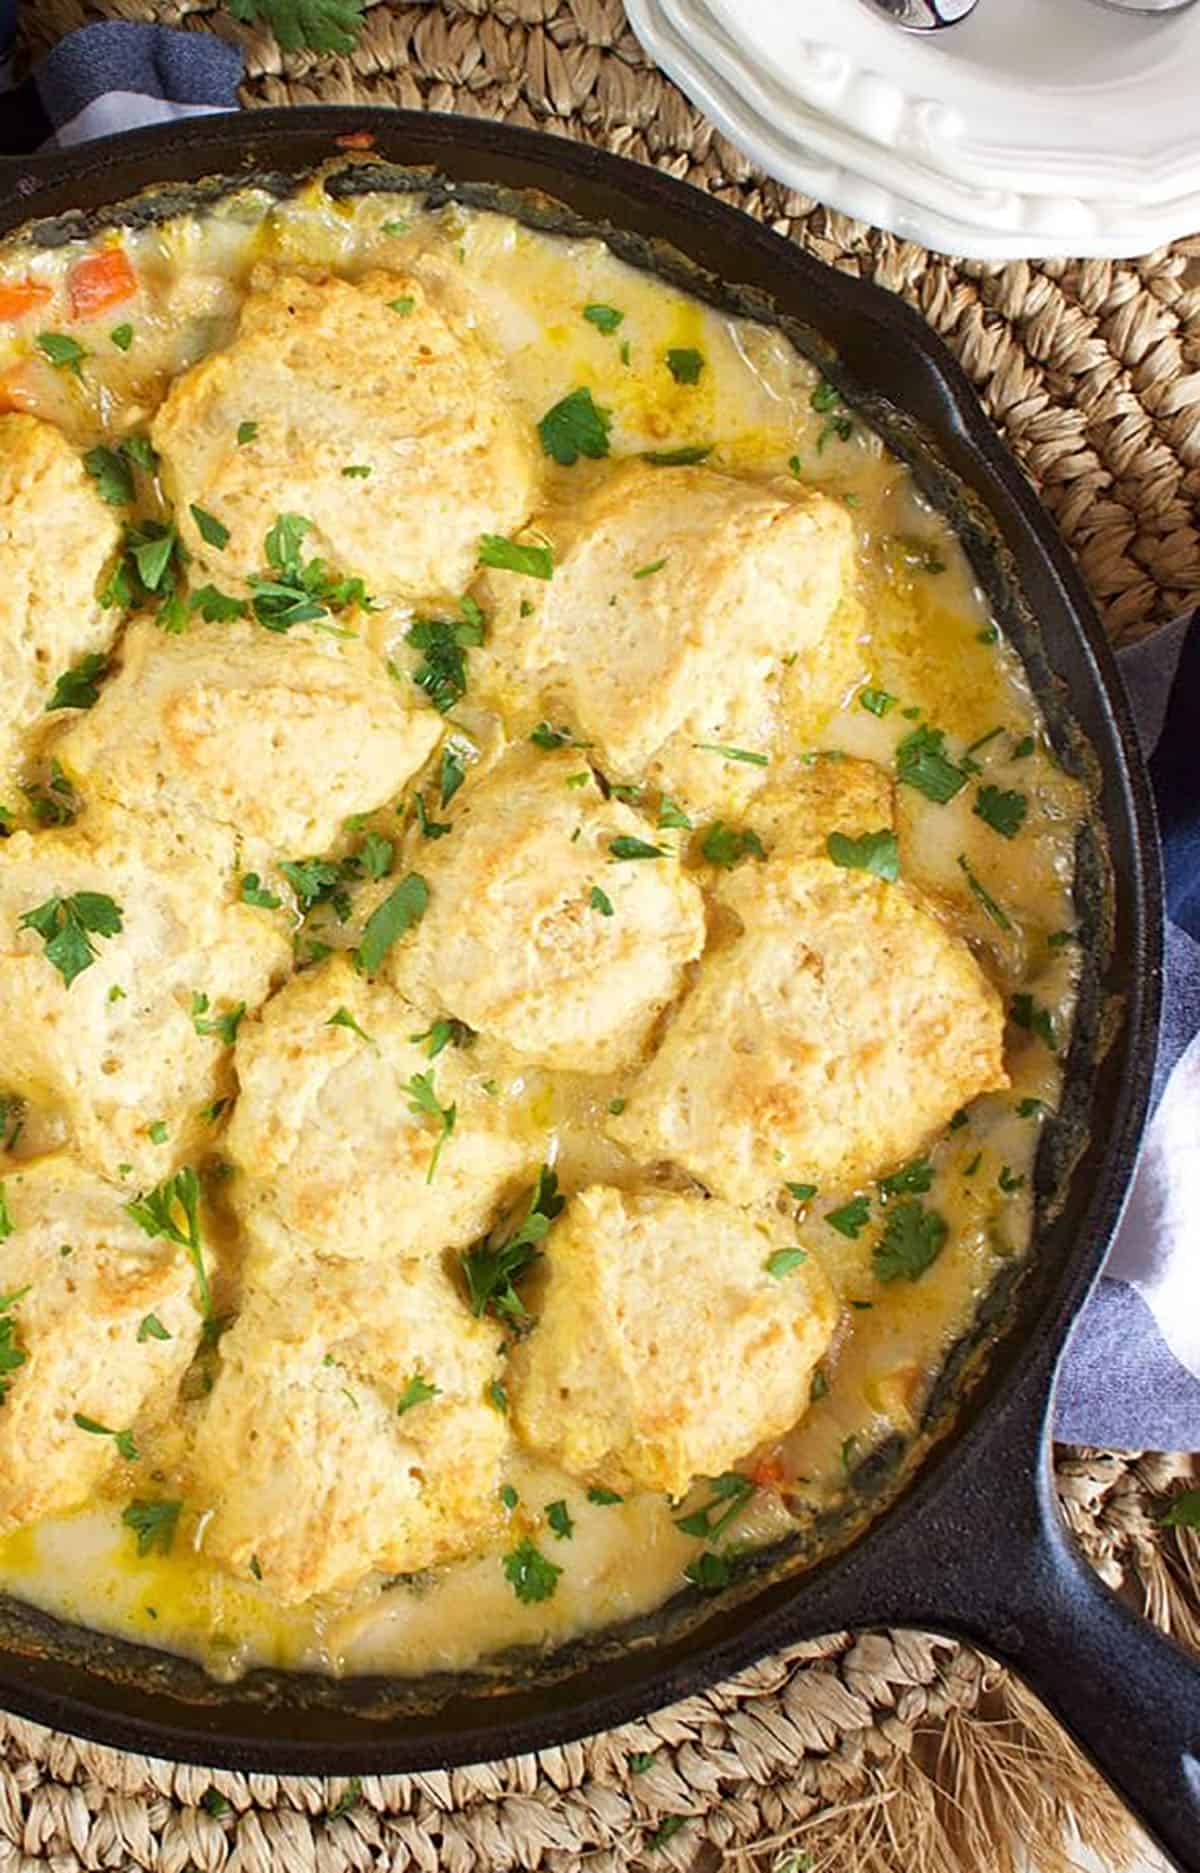 Chicken and Dumplings in a cast iron skillet on a wicker placemat